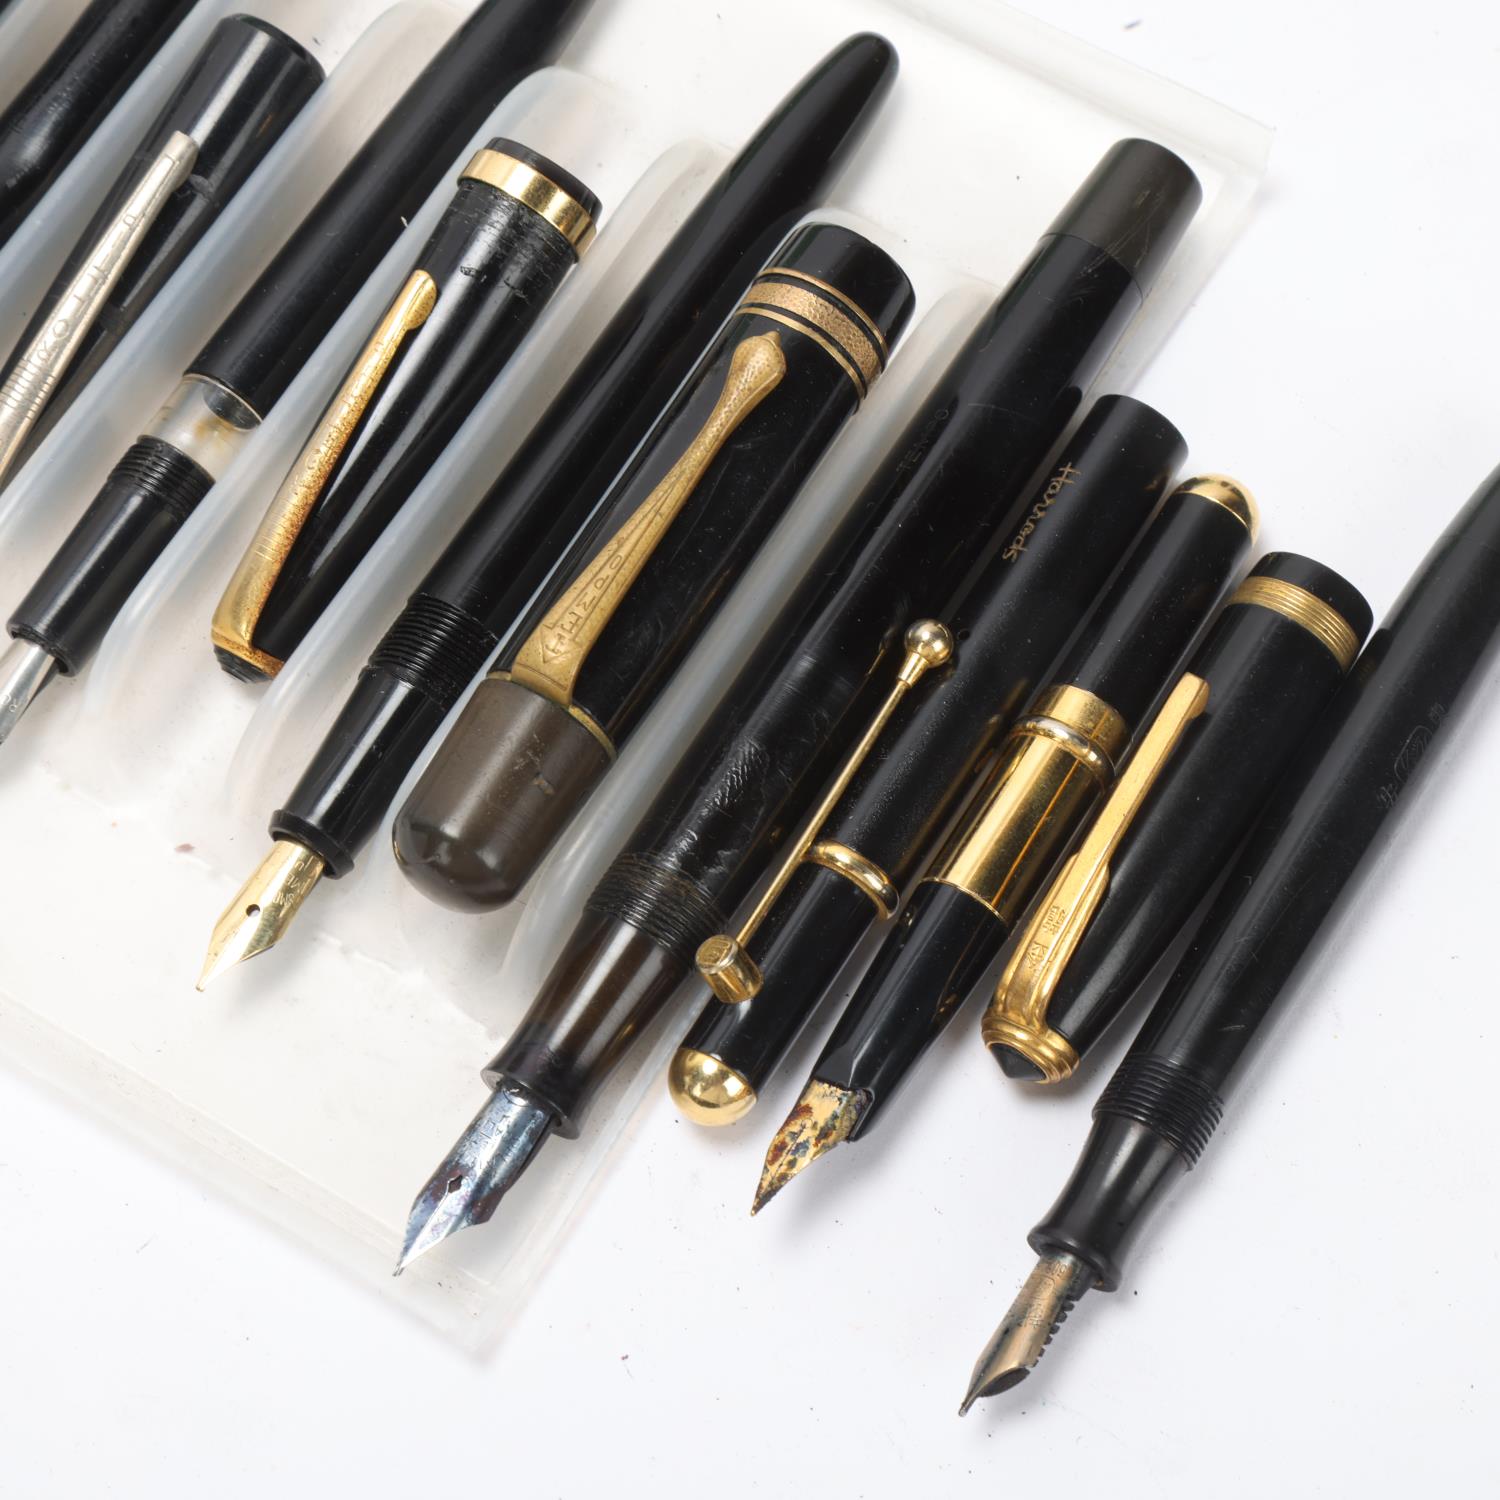 8 vintage fountain pens early to mid 20th century, including Tempo, 2x Rolltip, Rally Cup, W&T - Image 2 of 4